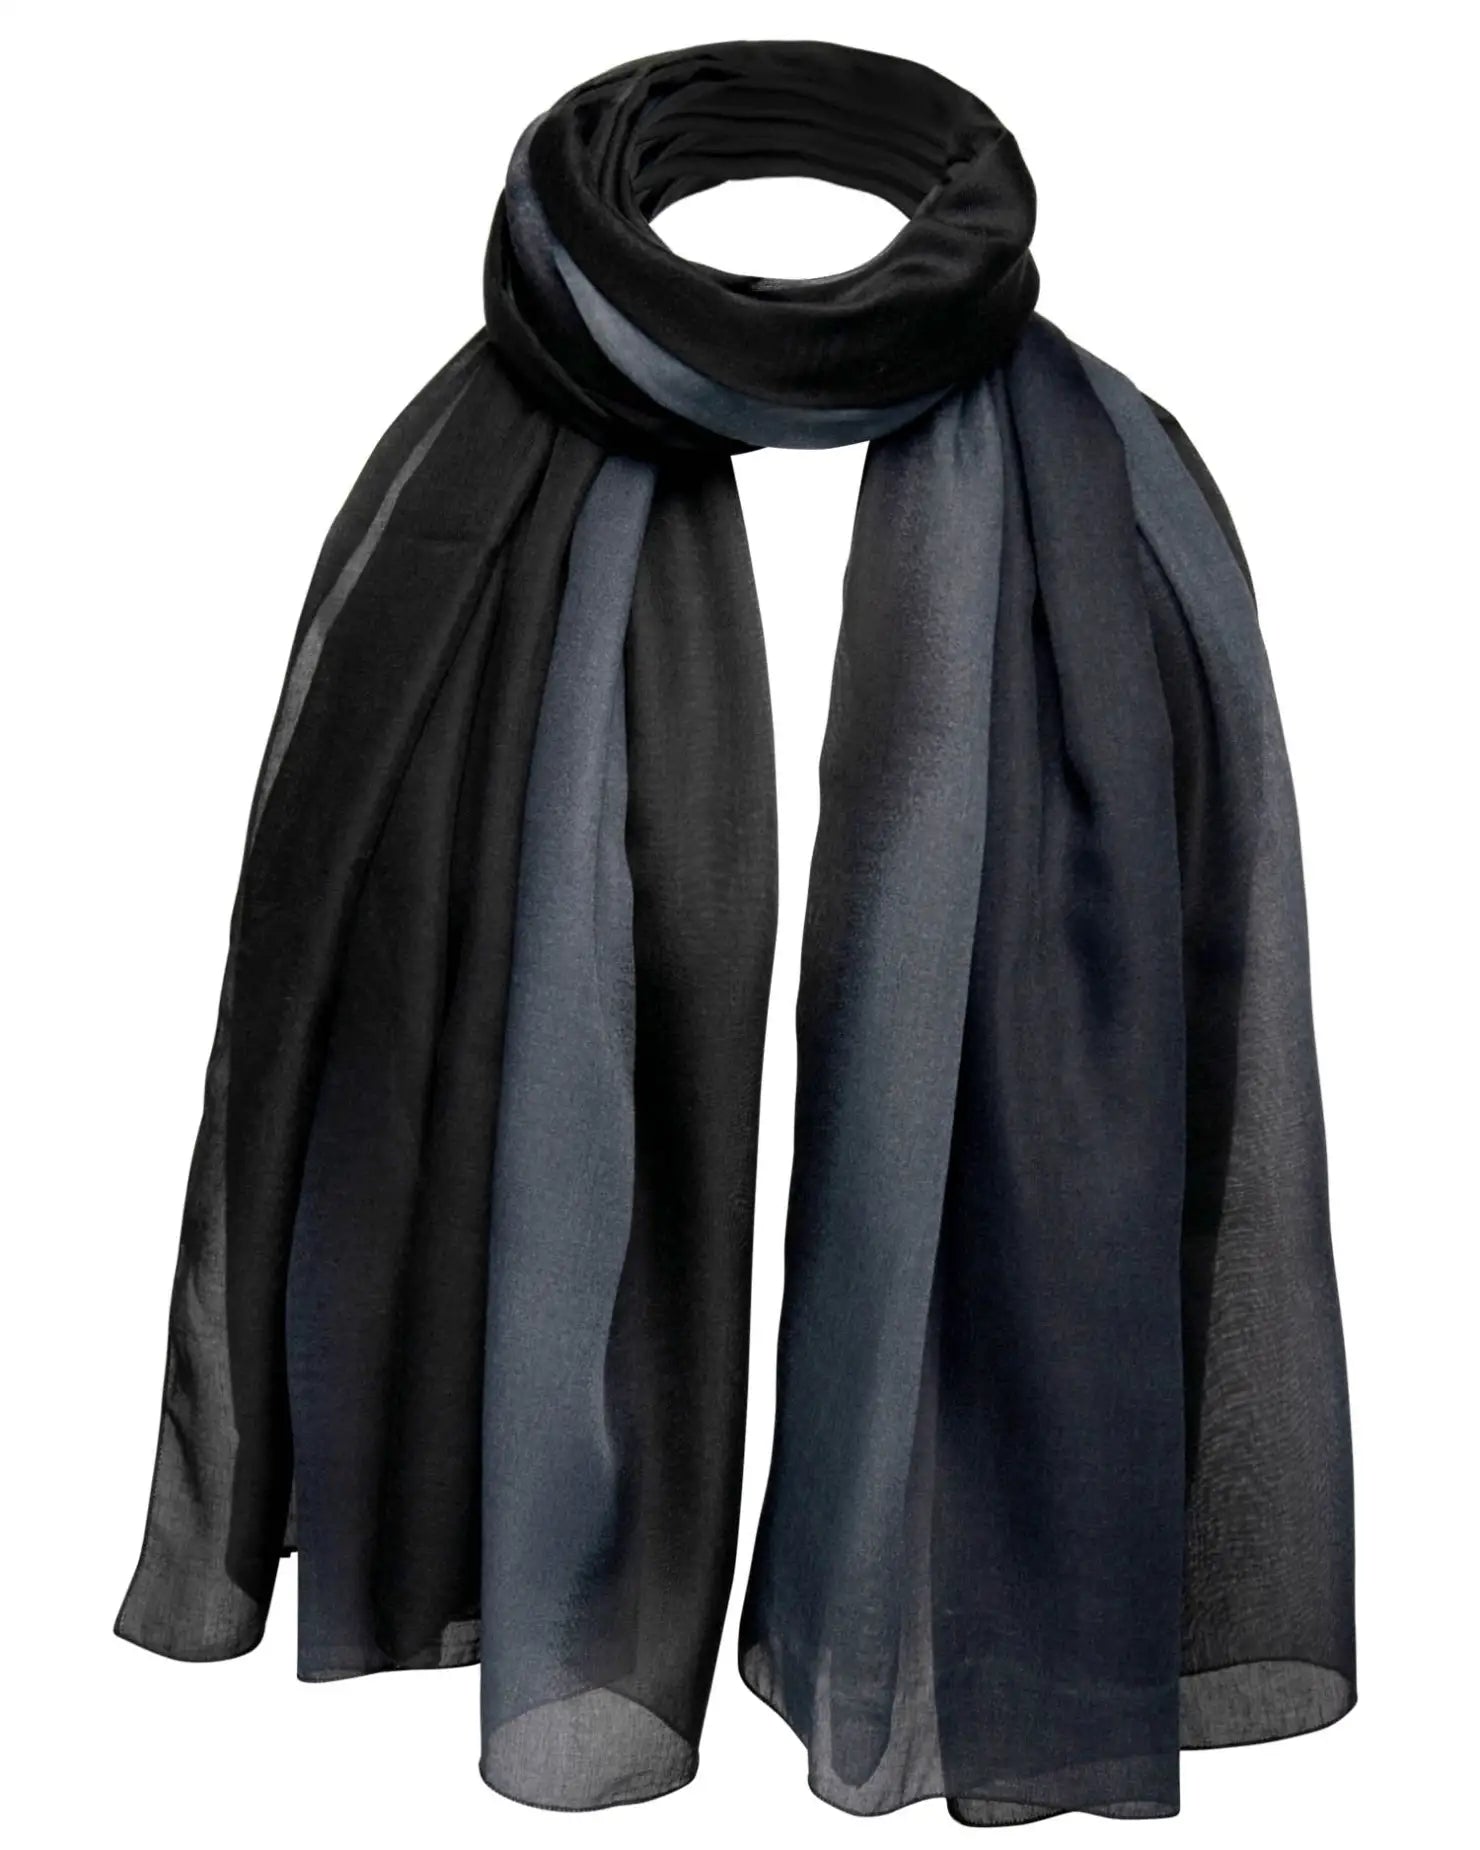 Ombre tie dye black scarf on white background